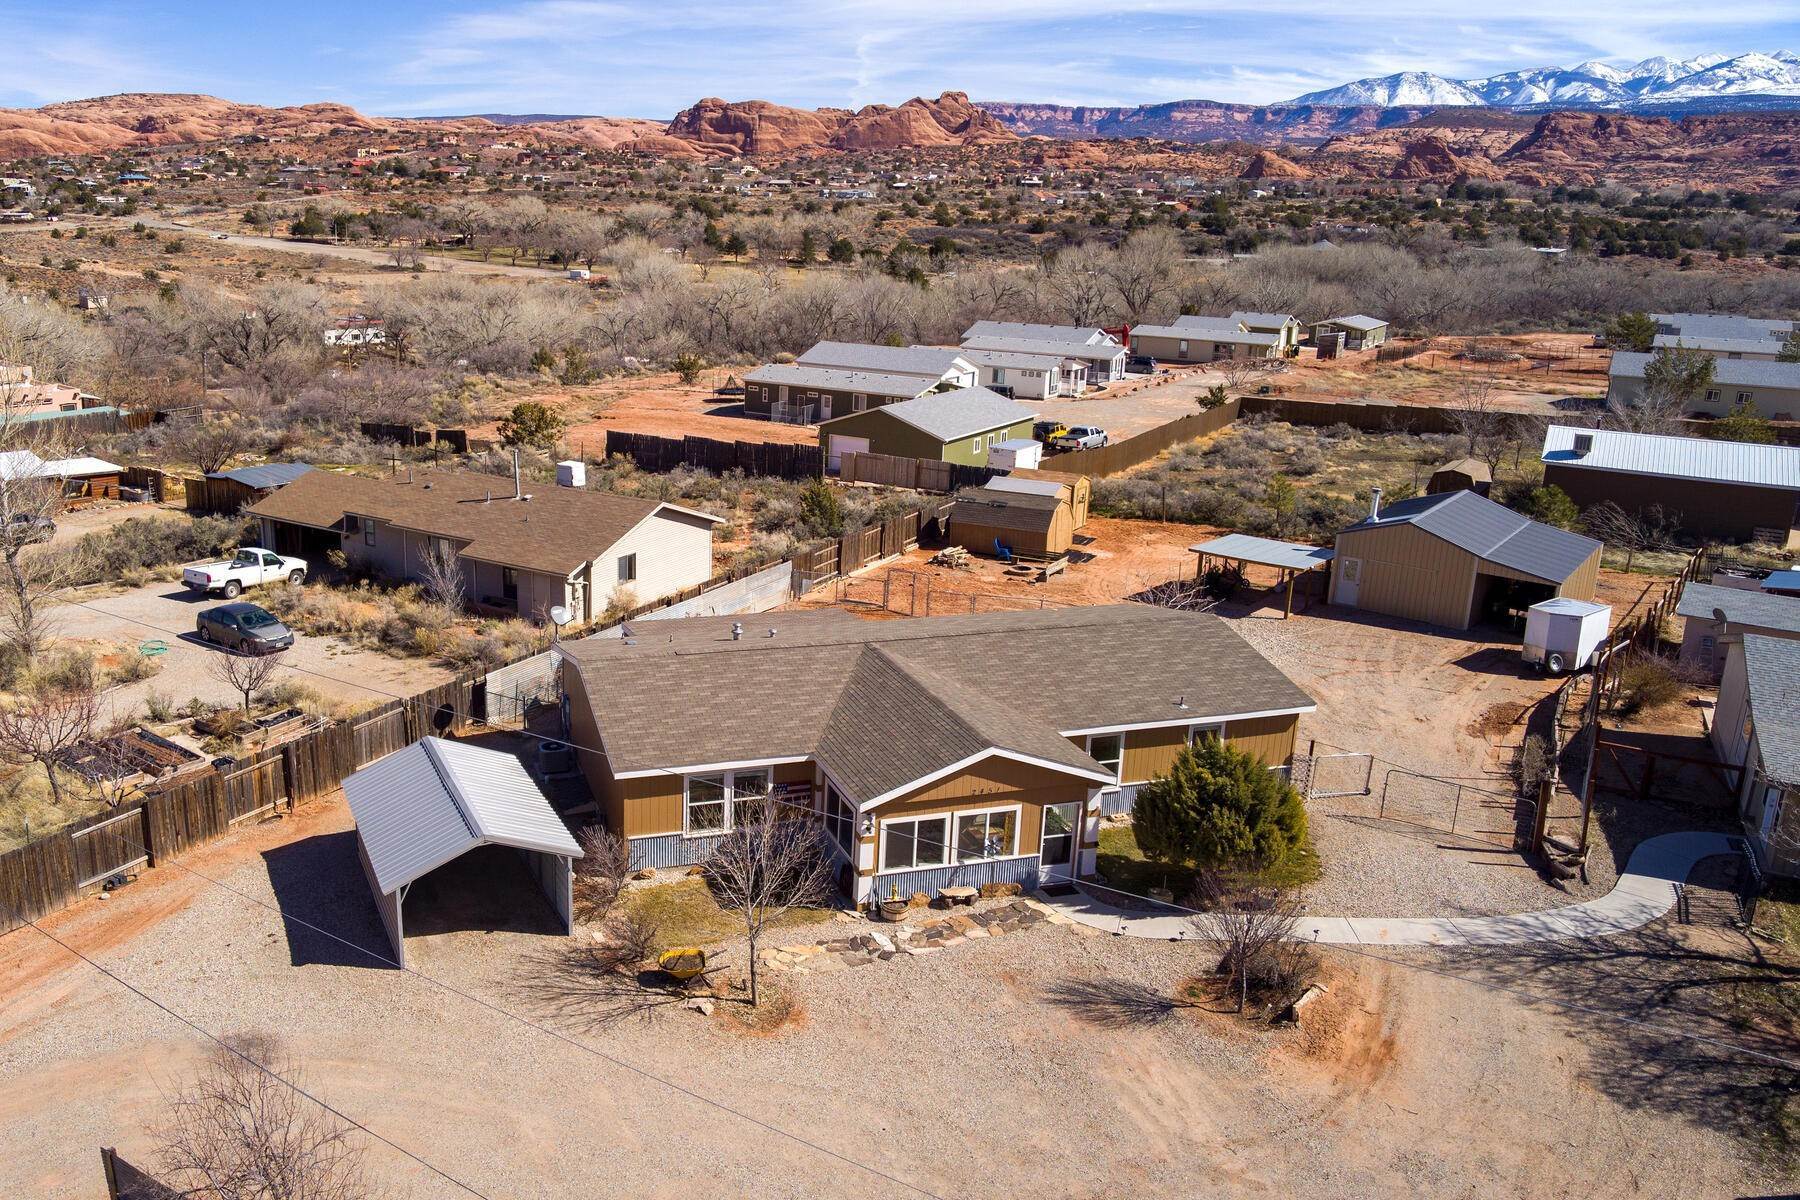 18. Property for Sale at Surrounded by Breathtaking Views of The La Sal Mountains 2451 Old City Park Road Moab, Utah 84532 United States